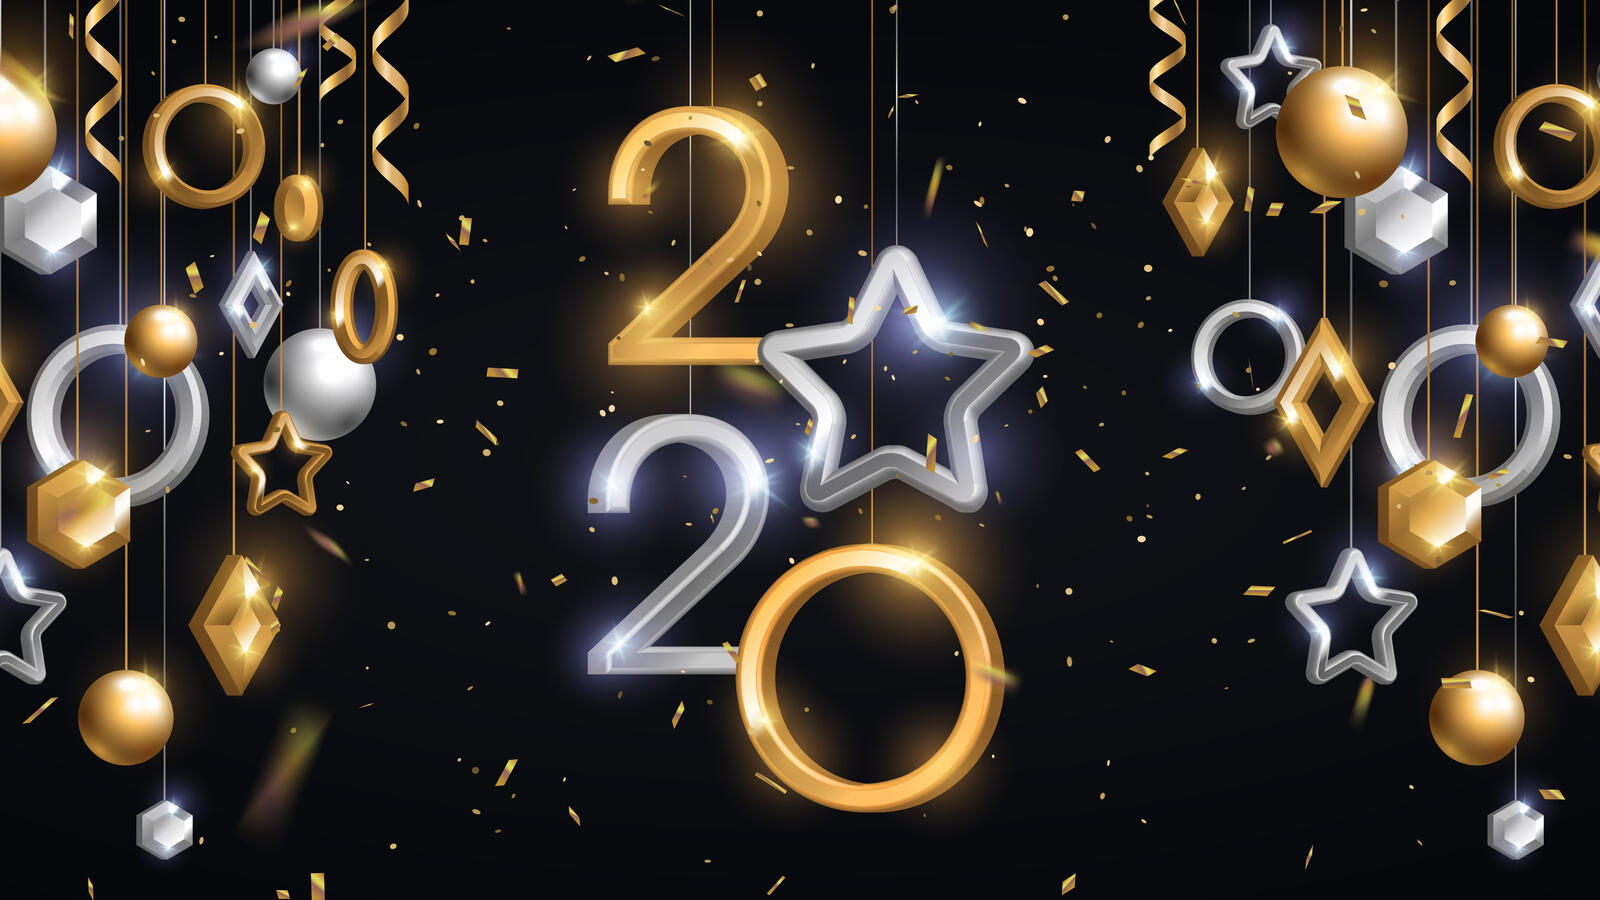 Wallpapers 2020 new year stars on the desktop